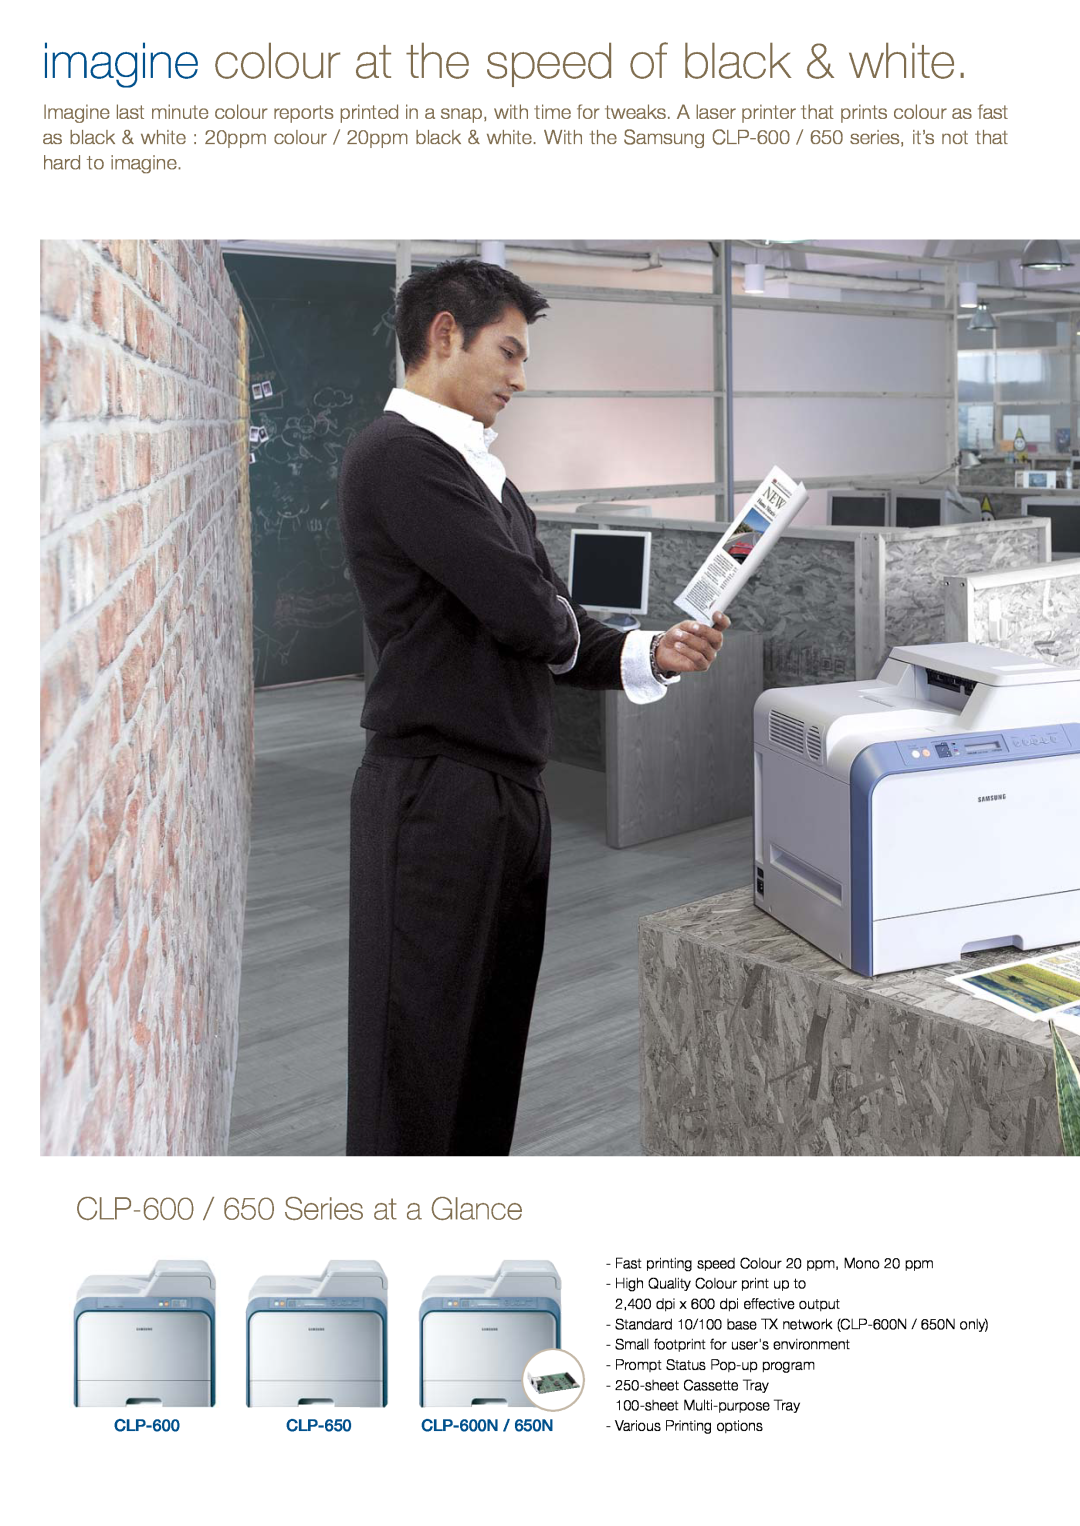 Samsung CLP-600N, CLP-650N specifications CLP-600 / 650 Series at a Glance, imagine colour at the speed of black & white 